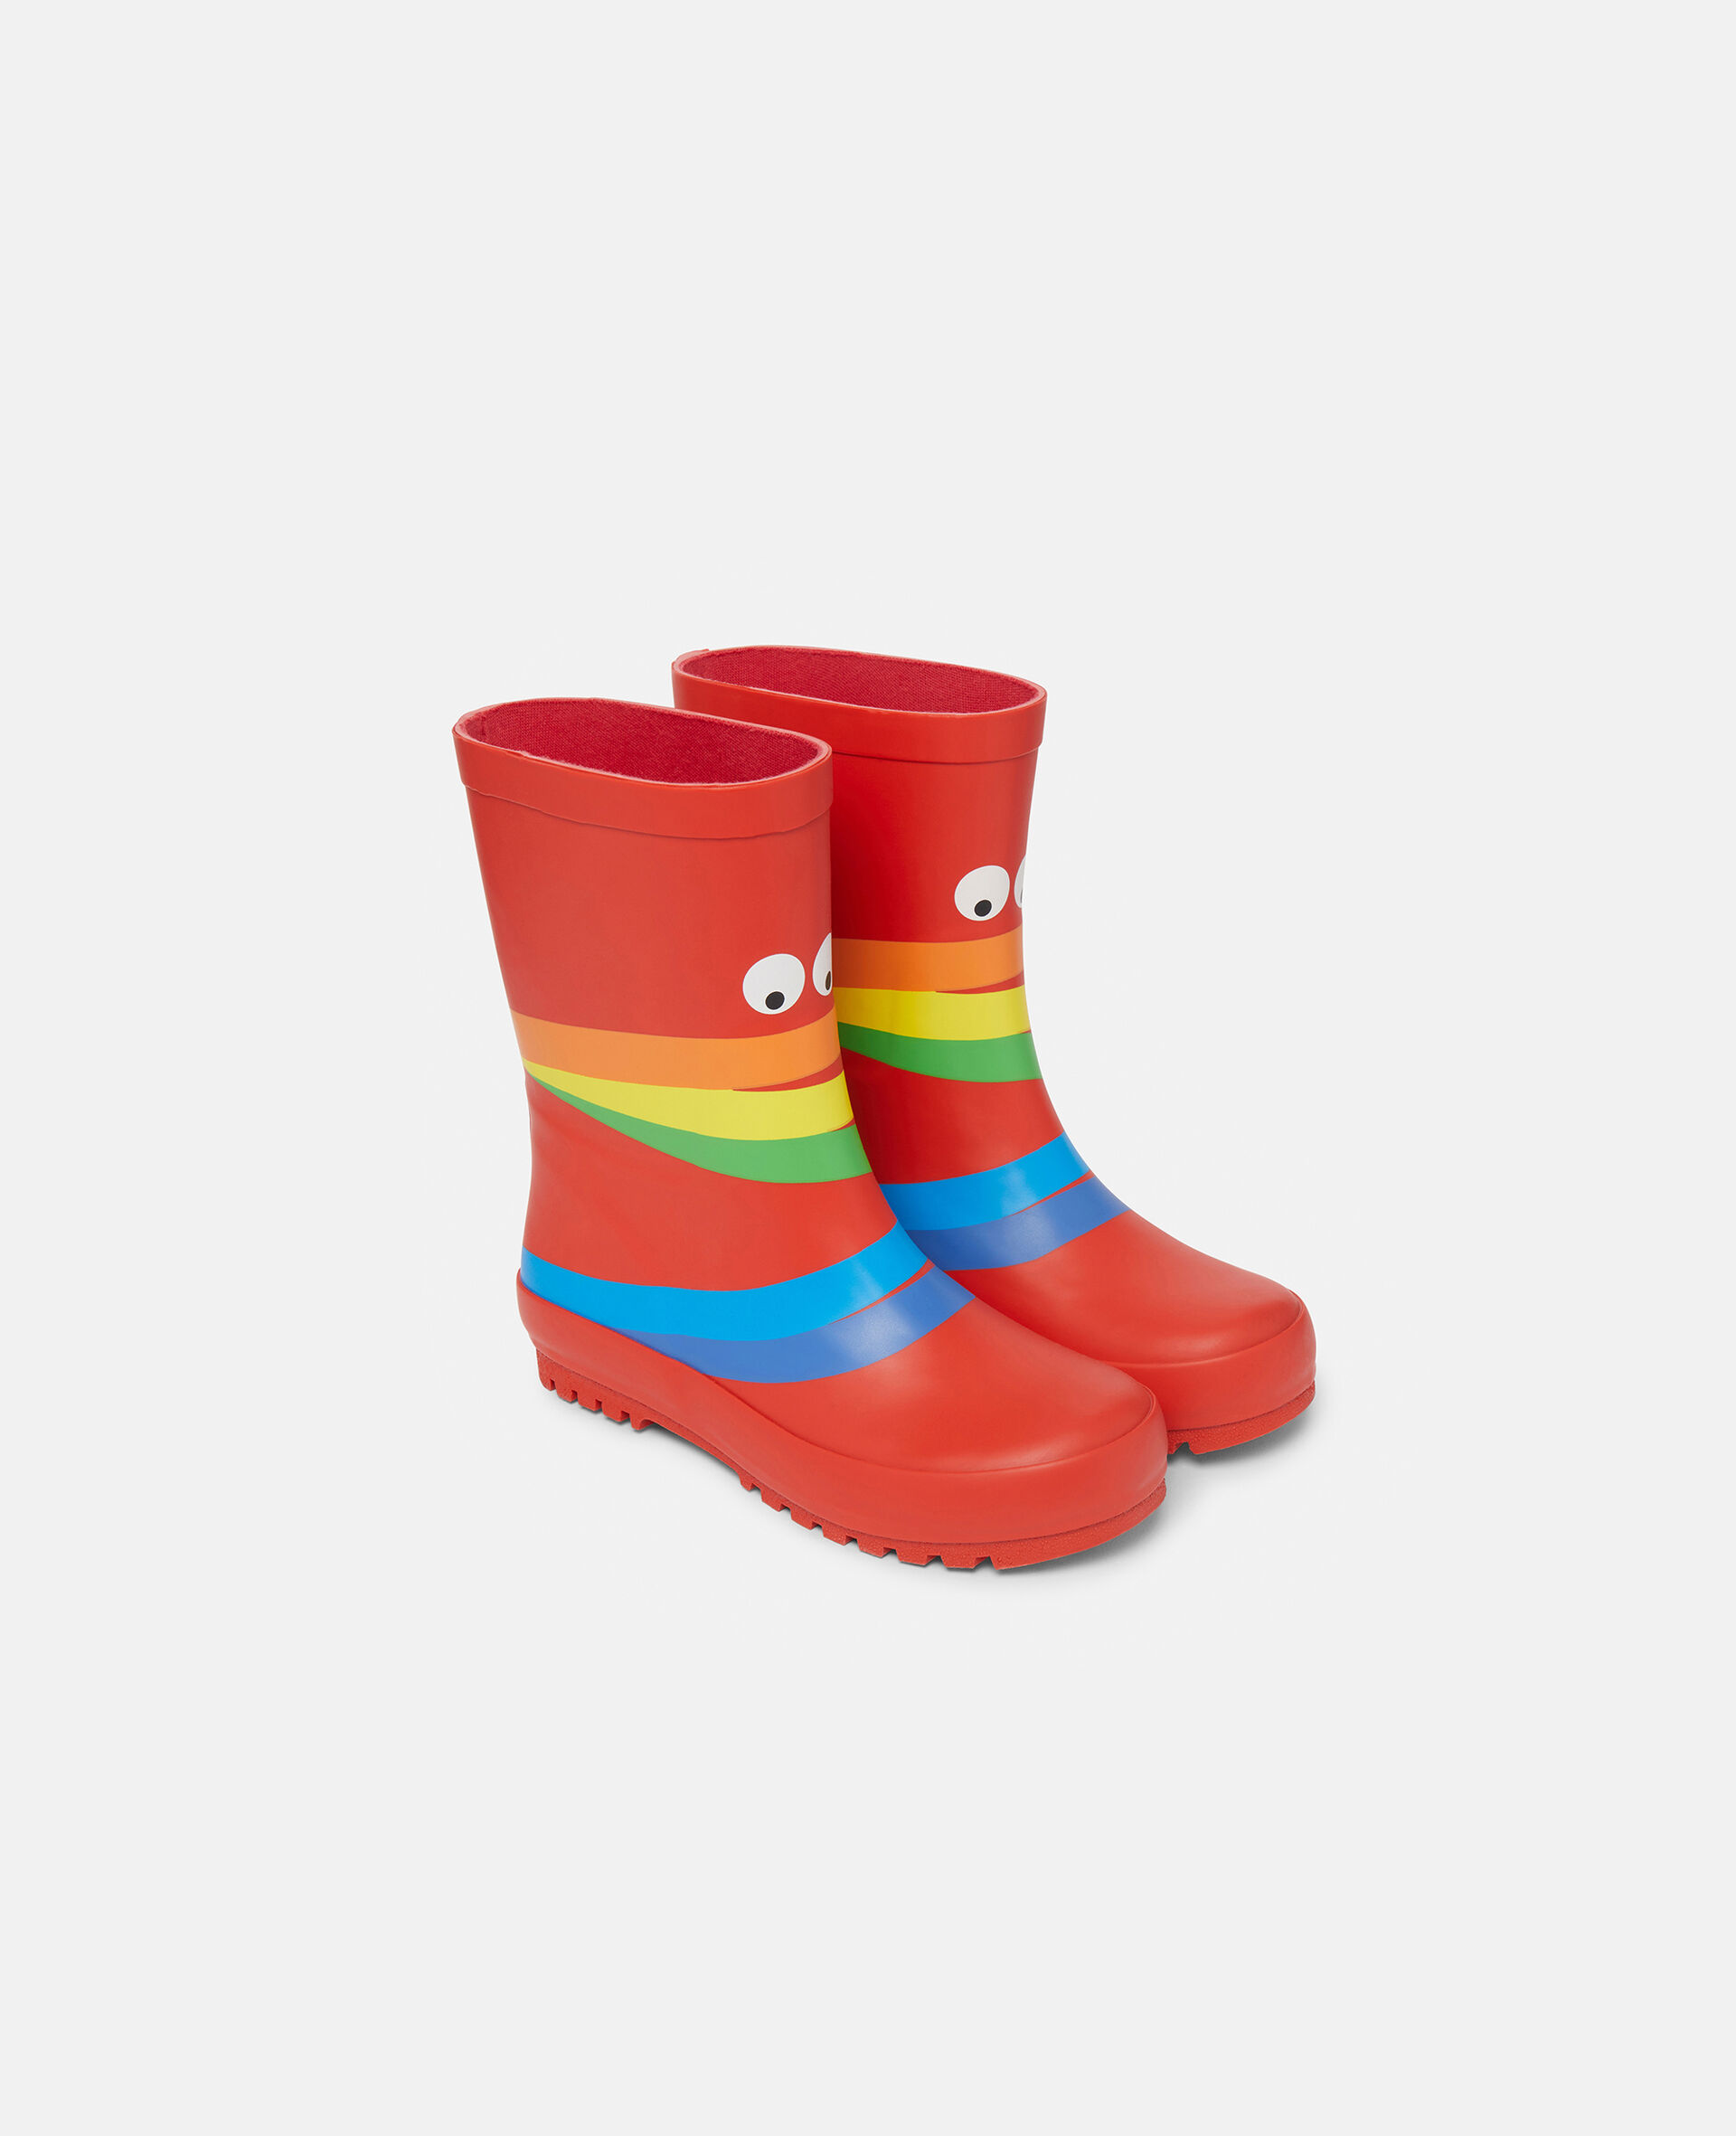 Rubber Rain Boots-Red-large image number 1